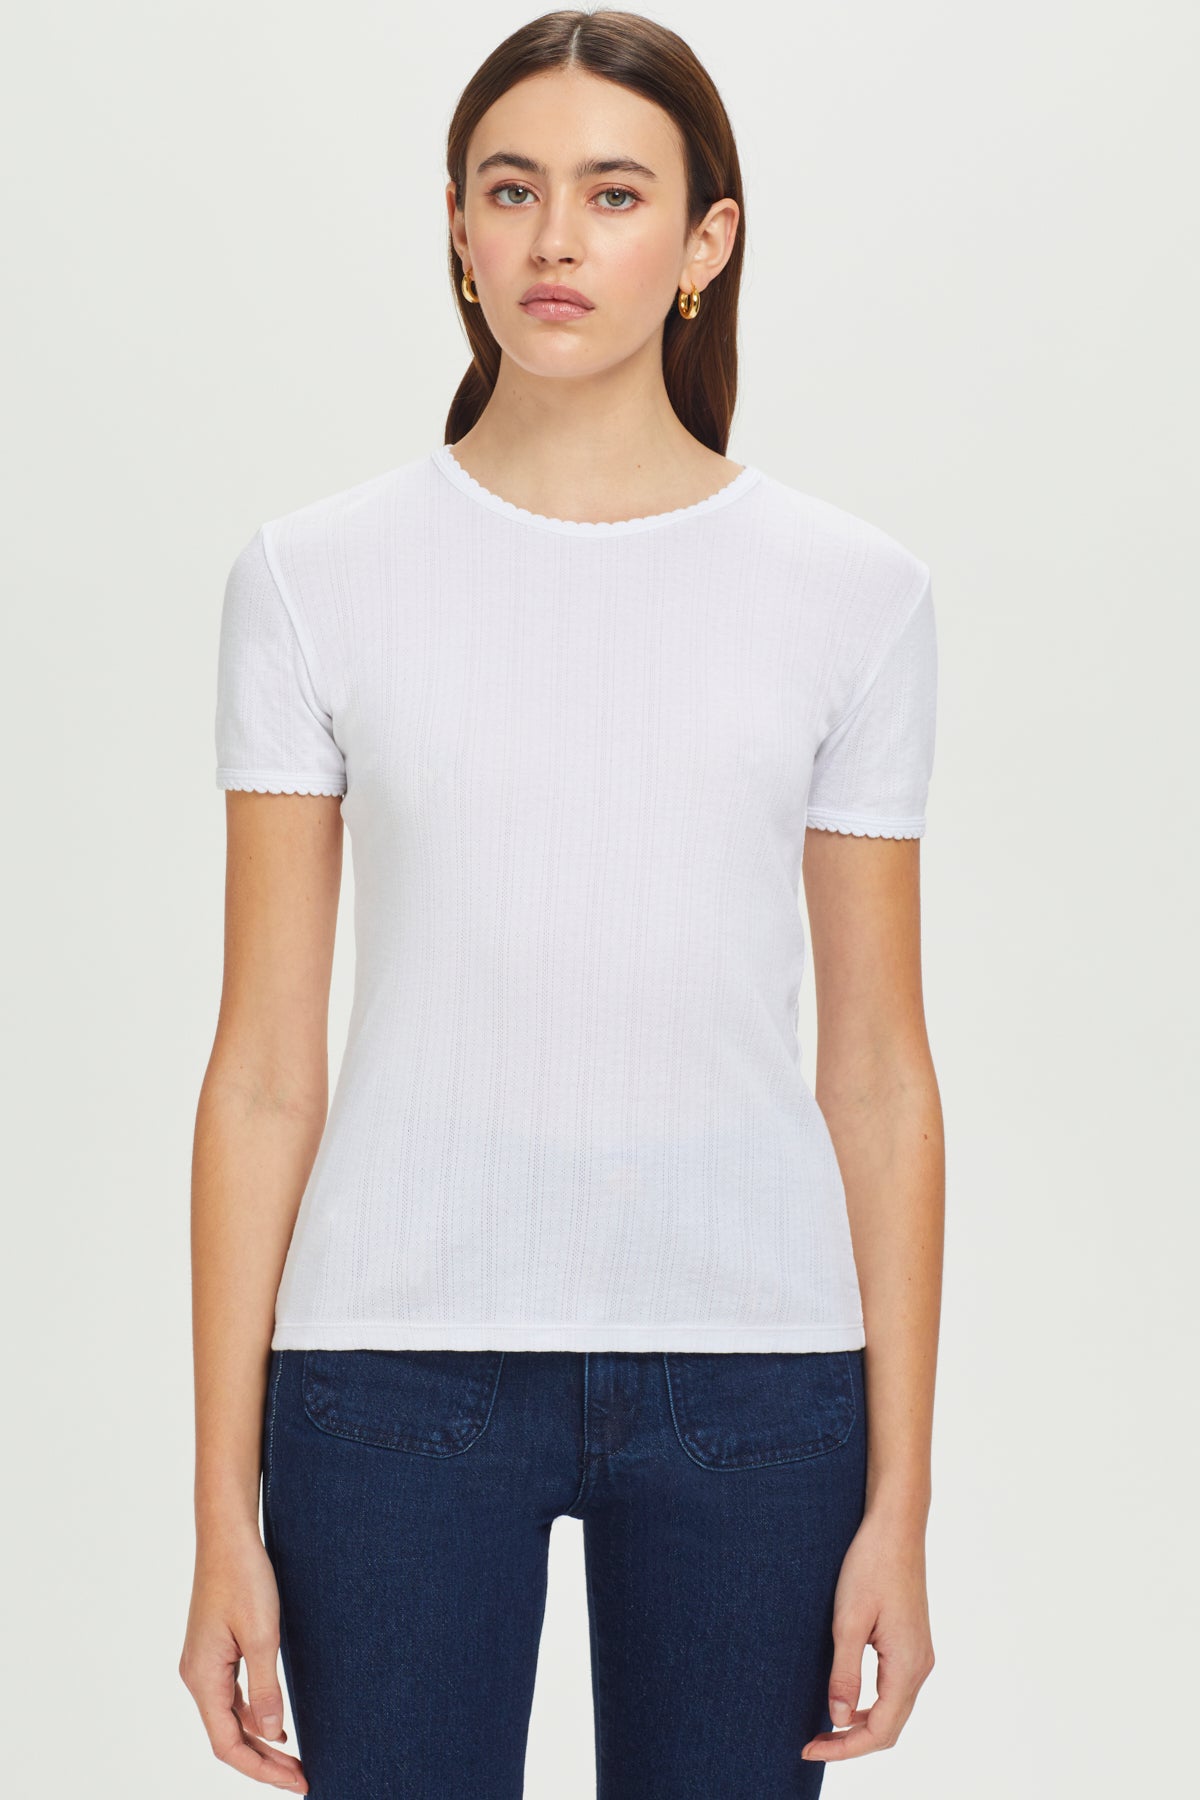 Topshop long sleeve lace pointelle T-shirt in lilac